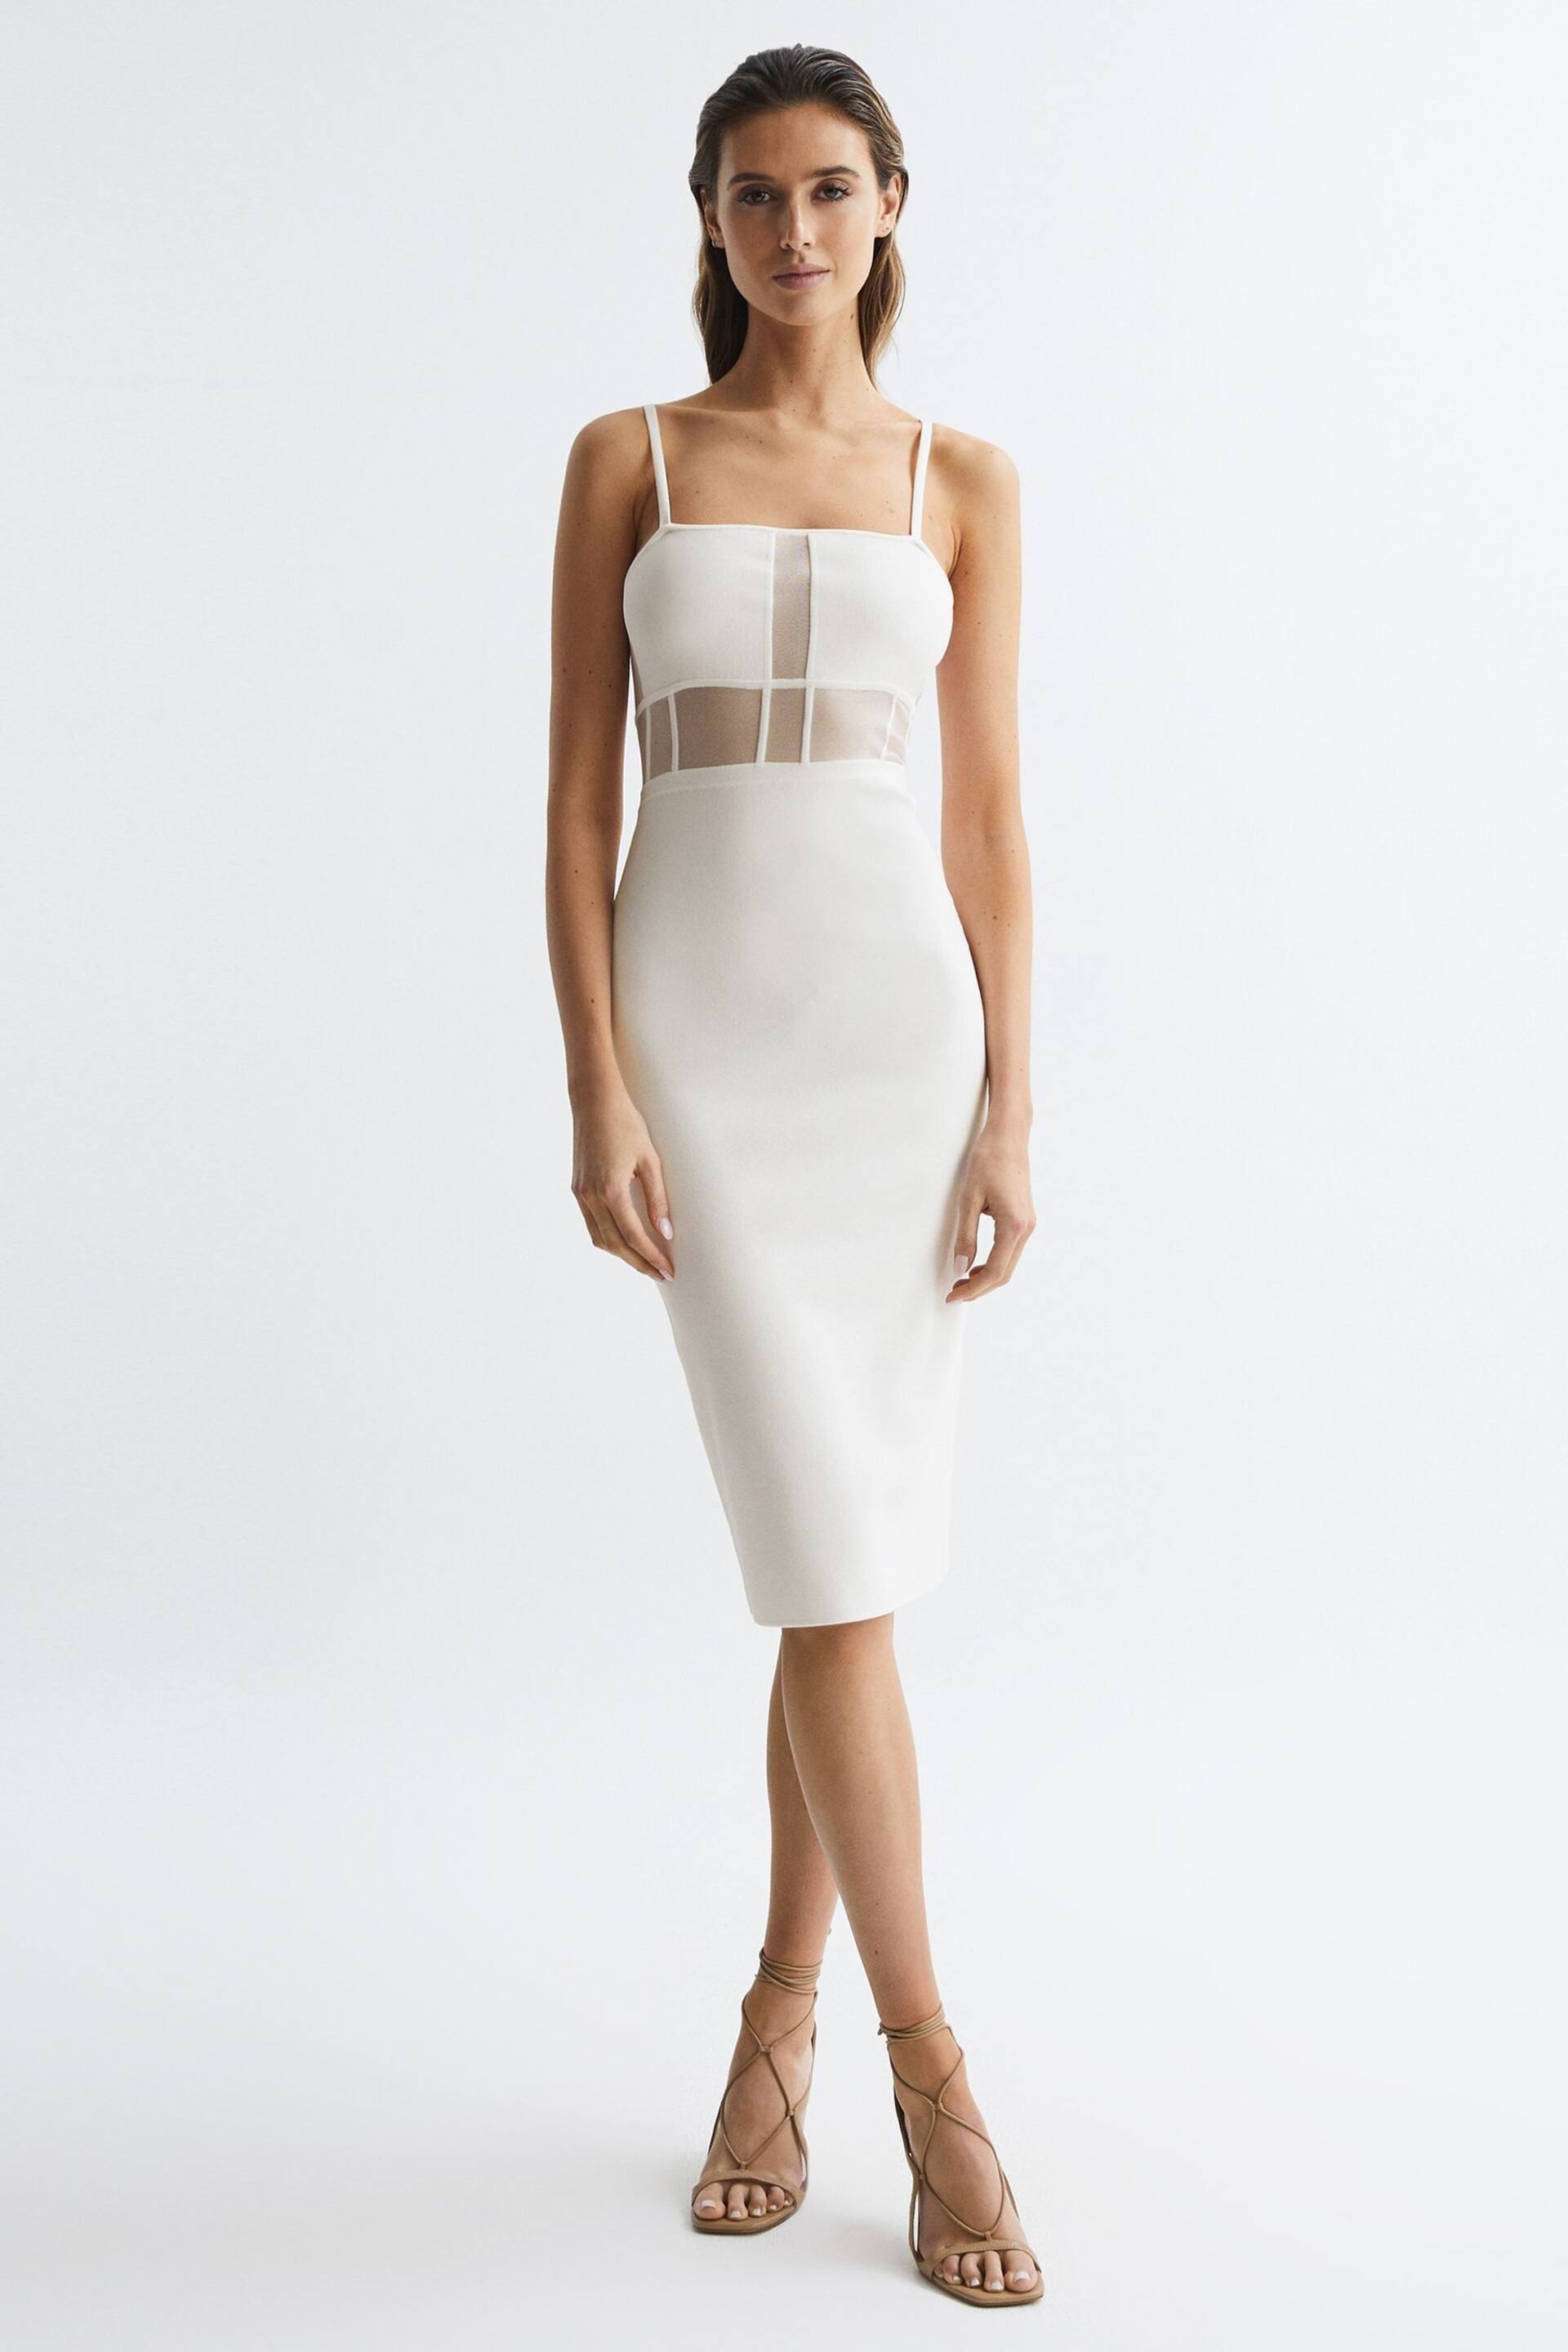 Reiss White Luisa Knitted Bodycon Dress - Image 1 of 6